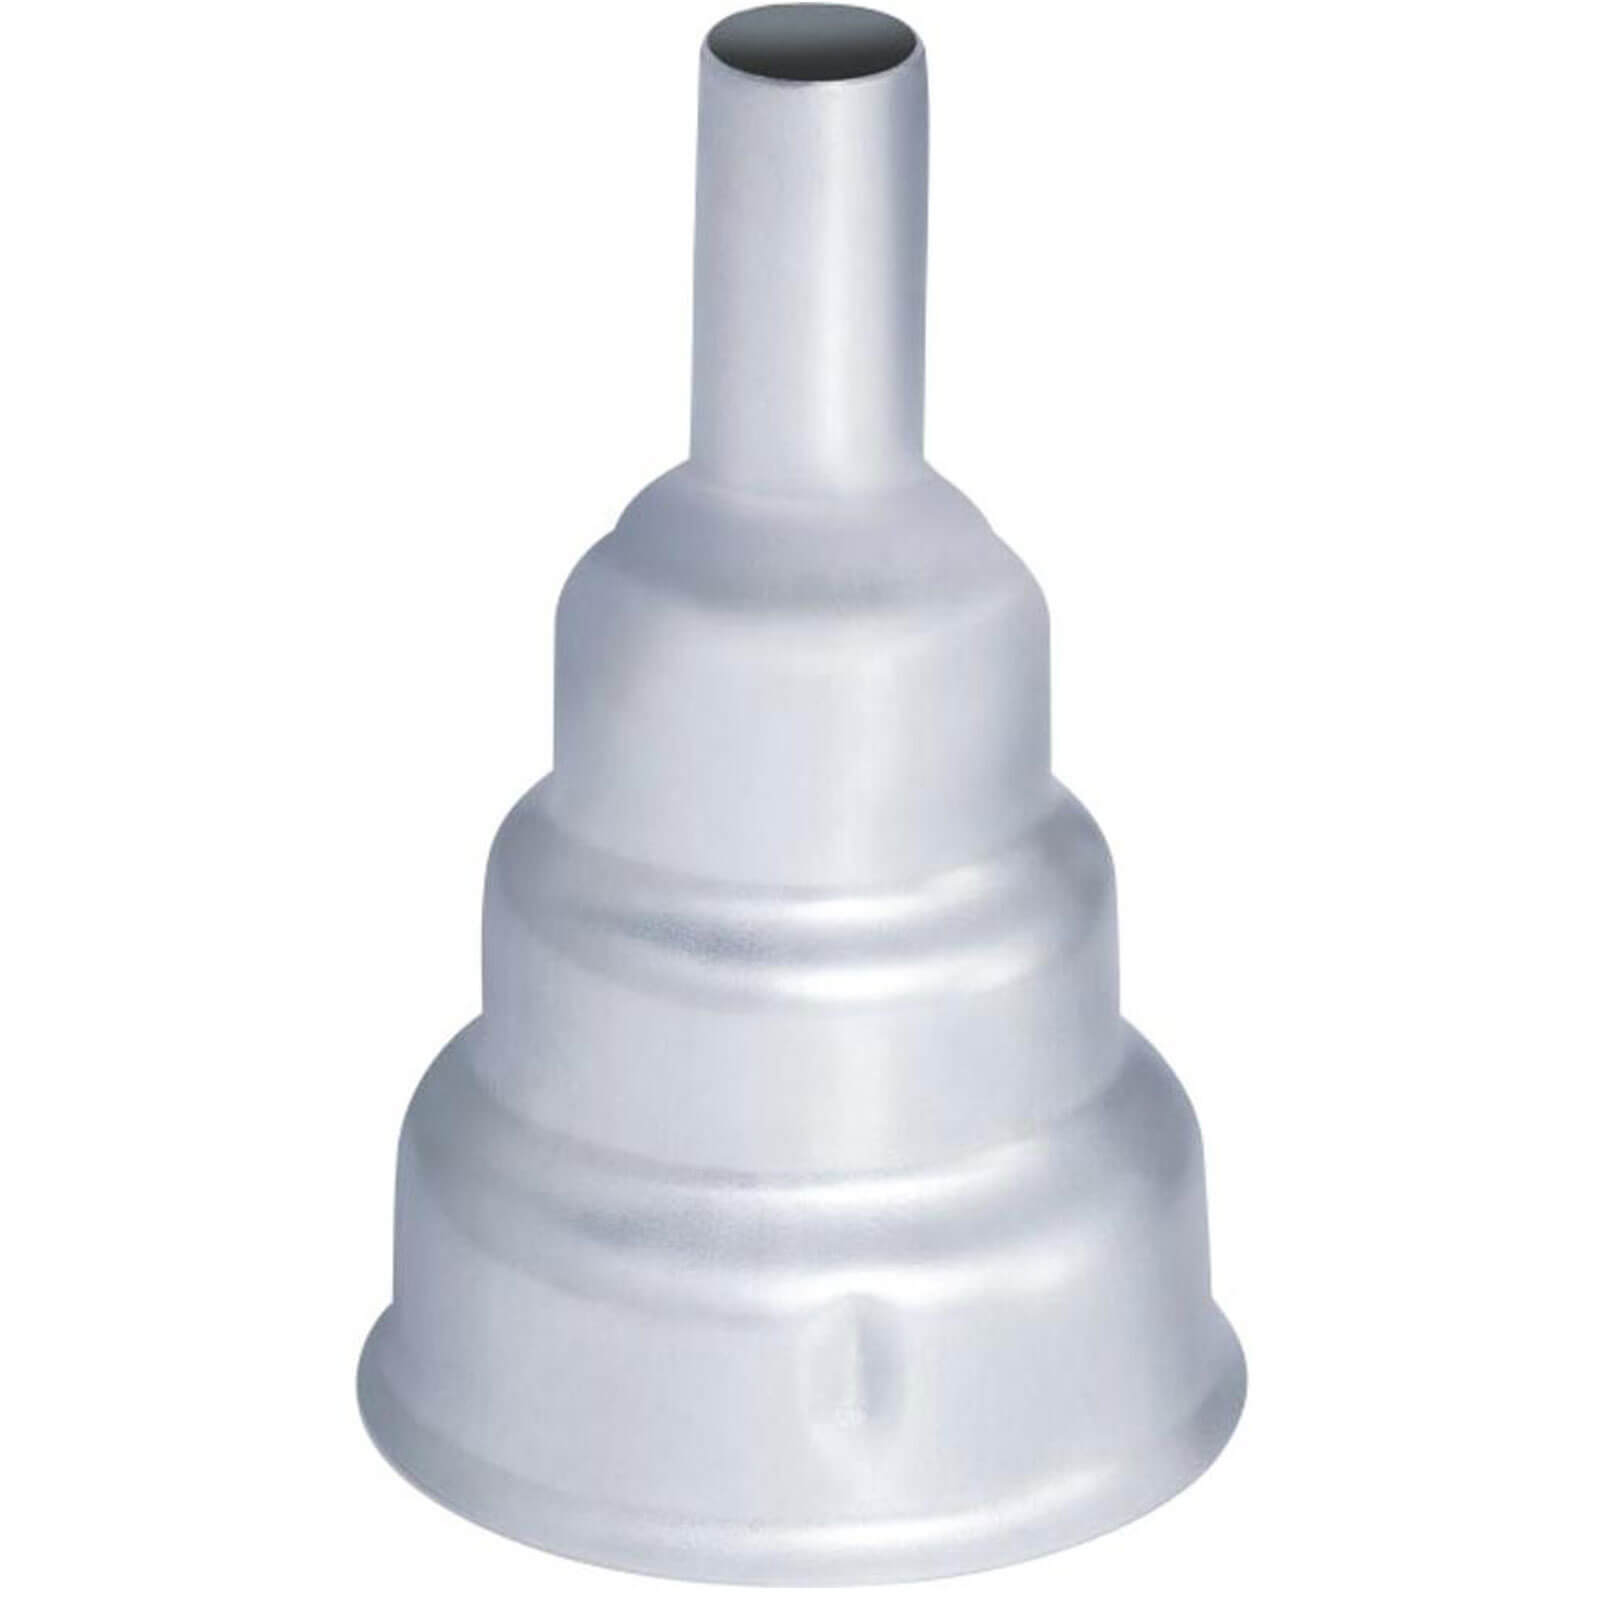 Image of Steinel Reduction Nozzle for HL Models and HG 2120 E, 2320 E and 2220 E 9mm